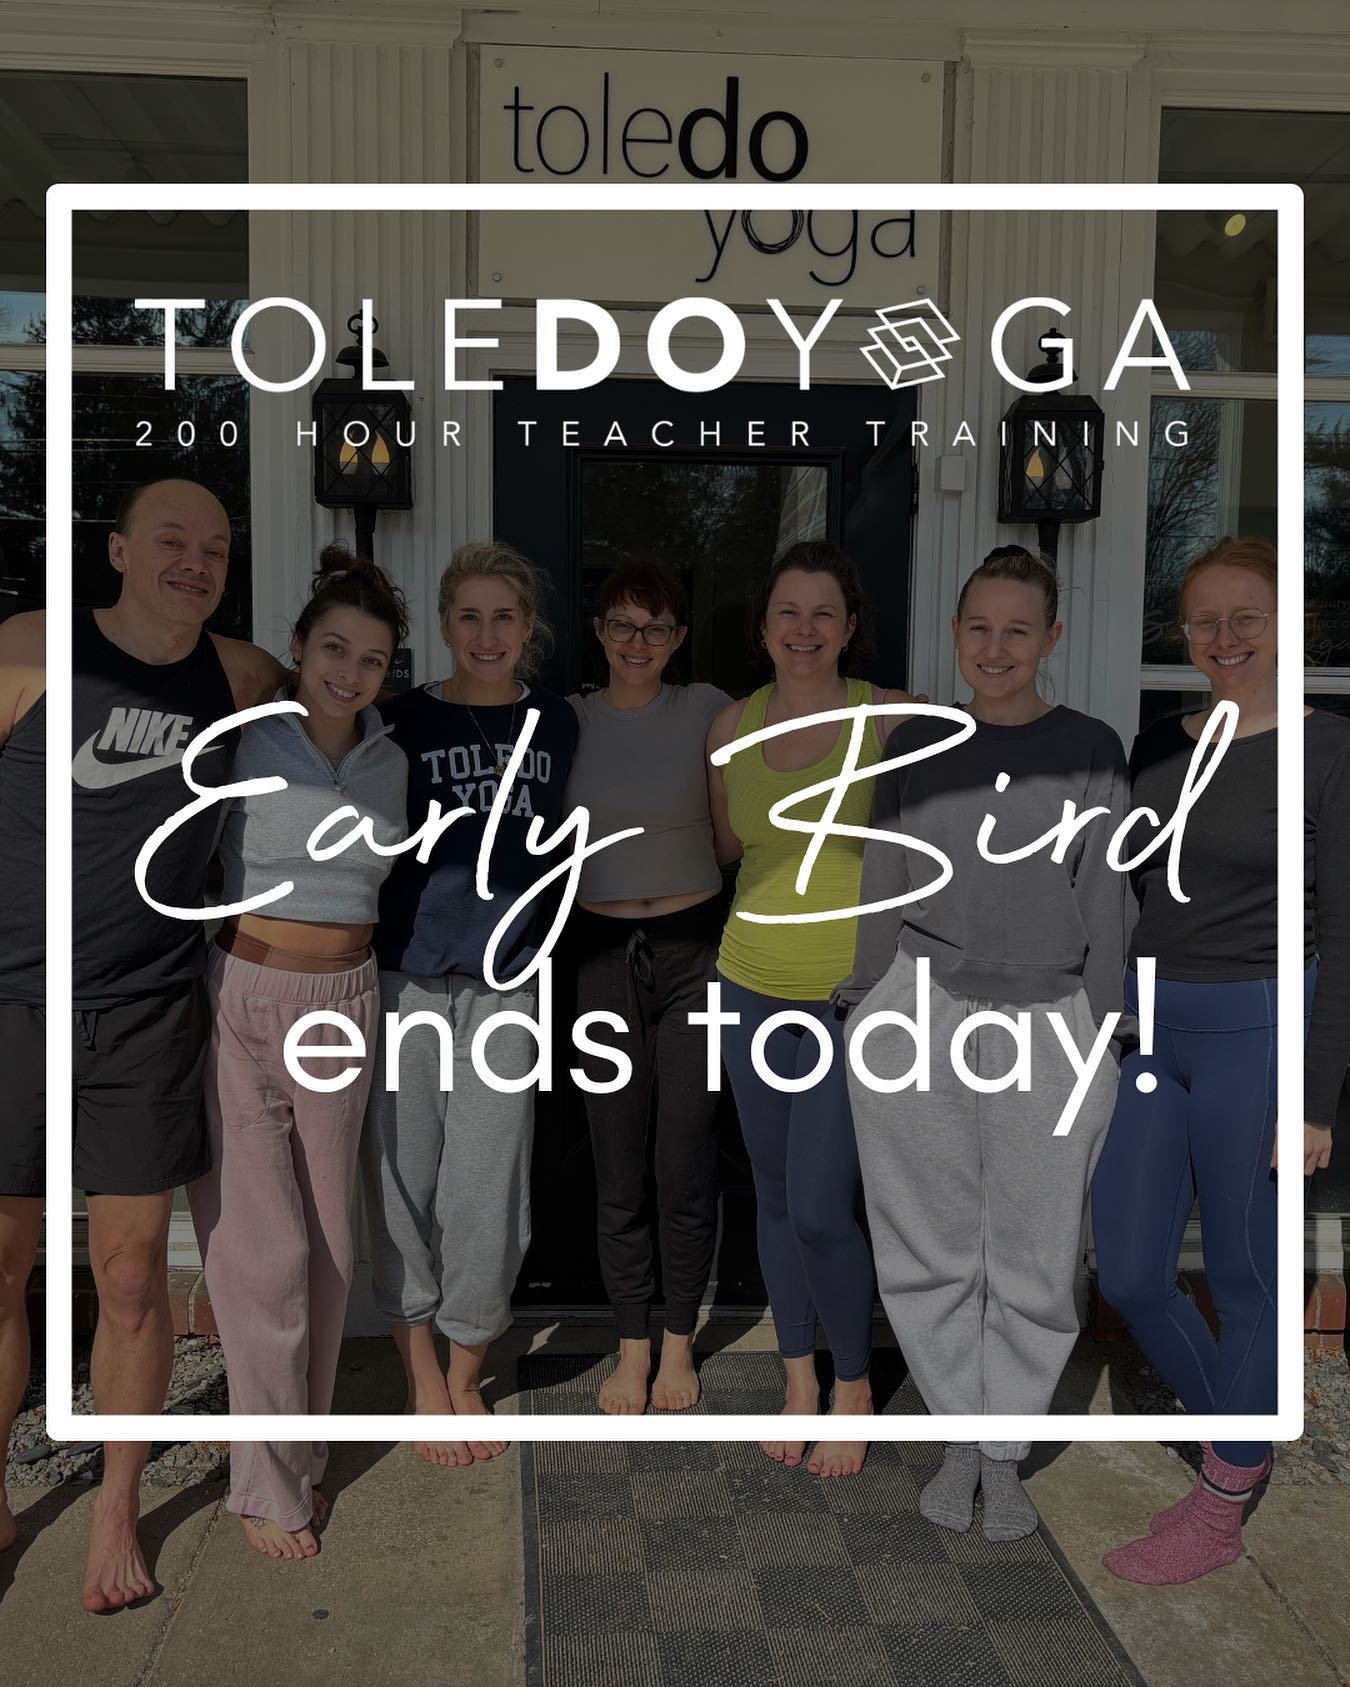 EARLY BIRD ENDS TODAY! // Today is your last chance to save $300 on your Teacher Training tuition! Early bird pricing ends today, May 8th. 

In Toledo Yoga&rsquo;s 200-hour Teacher Training, you will gain new perspective through asana, meditation, an